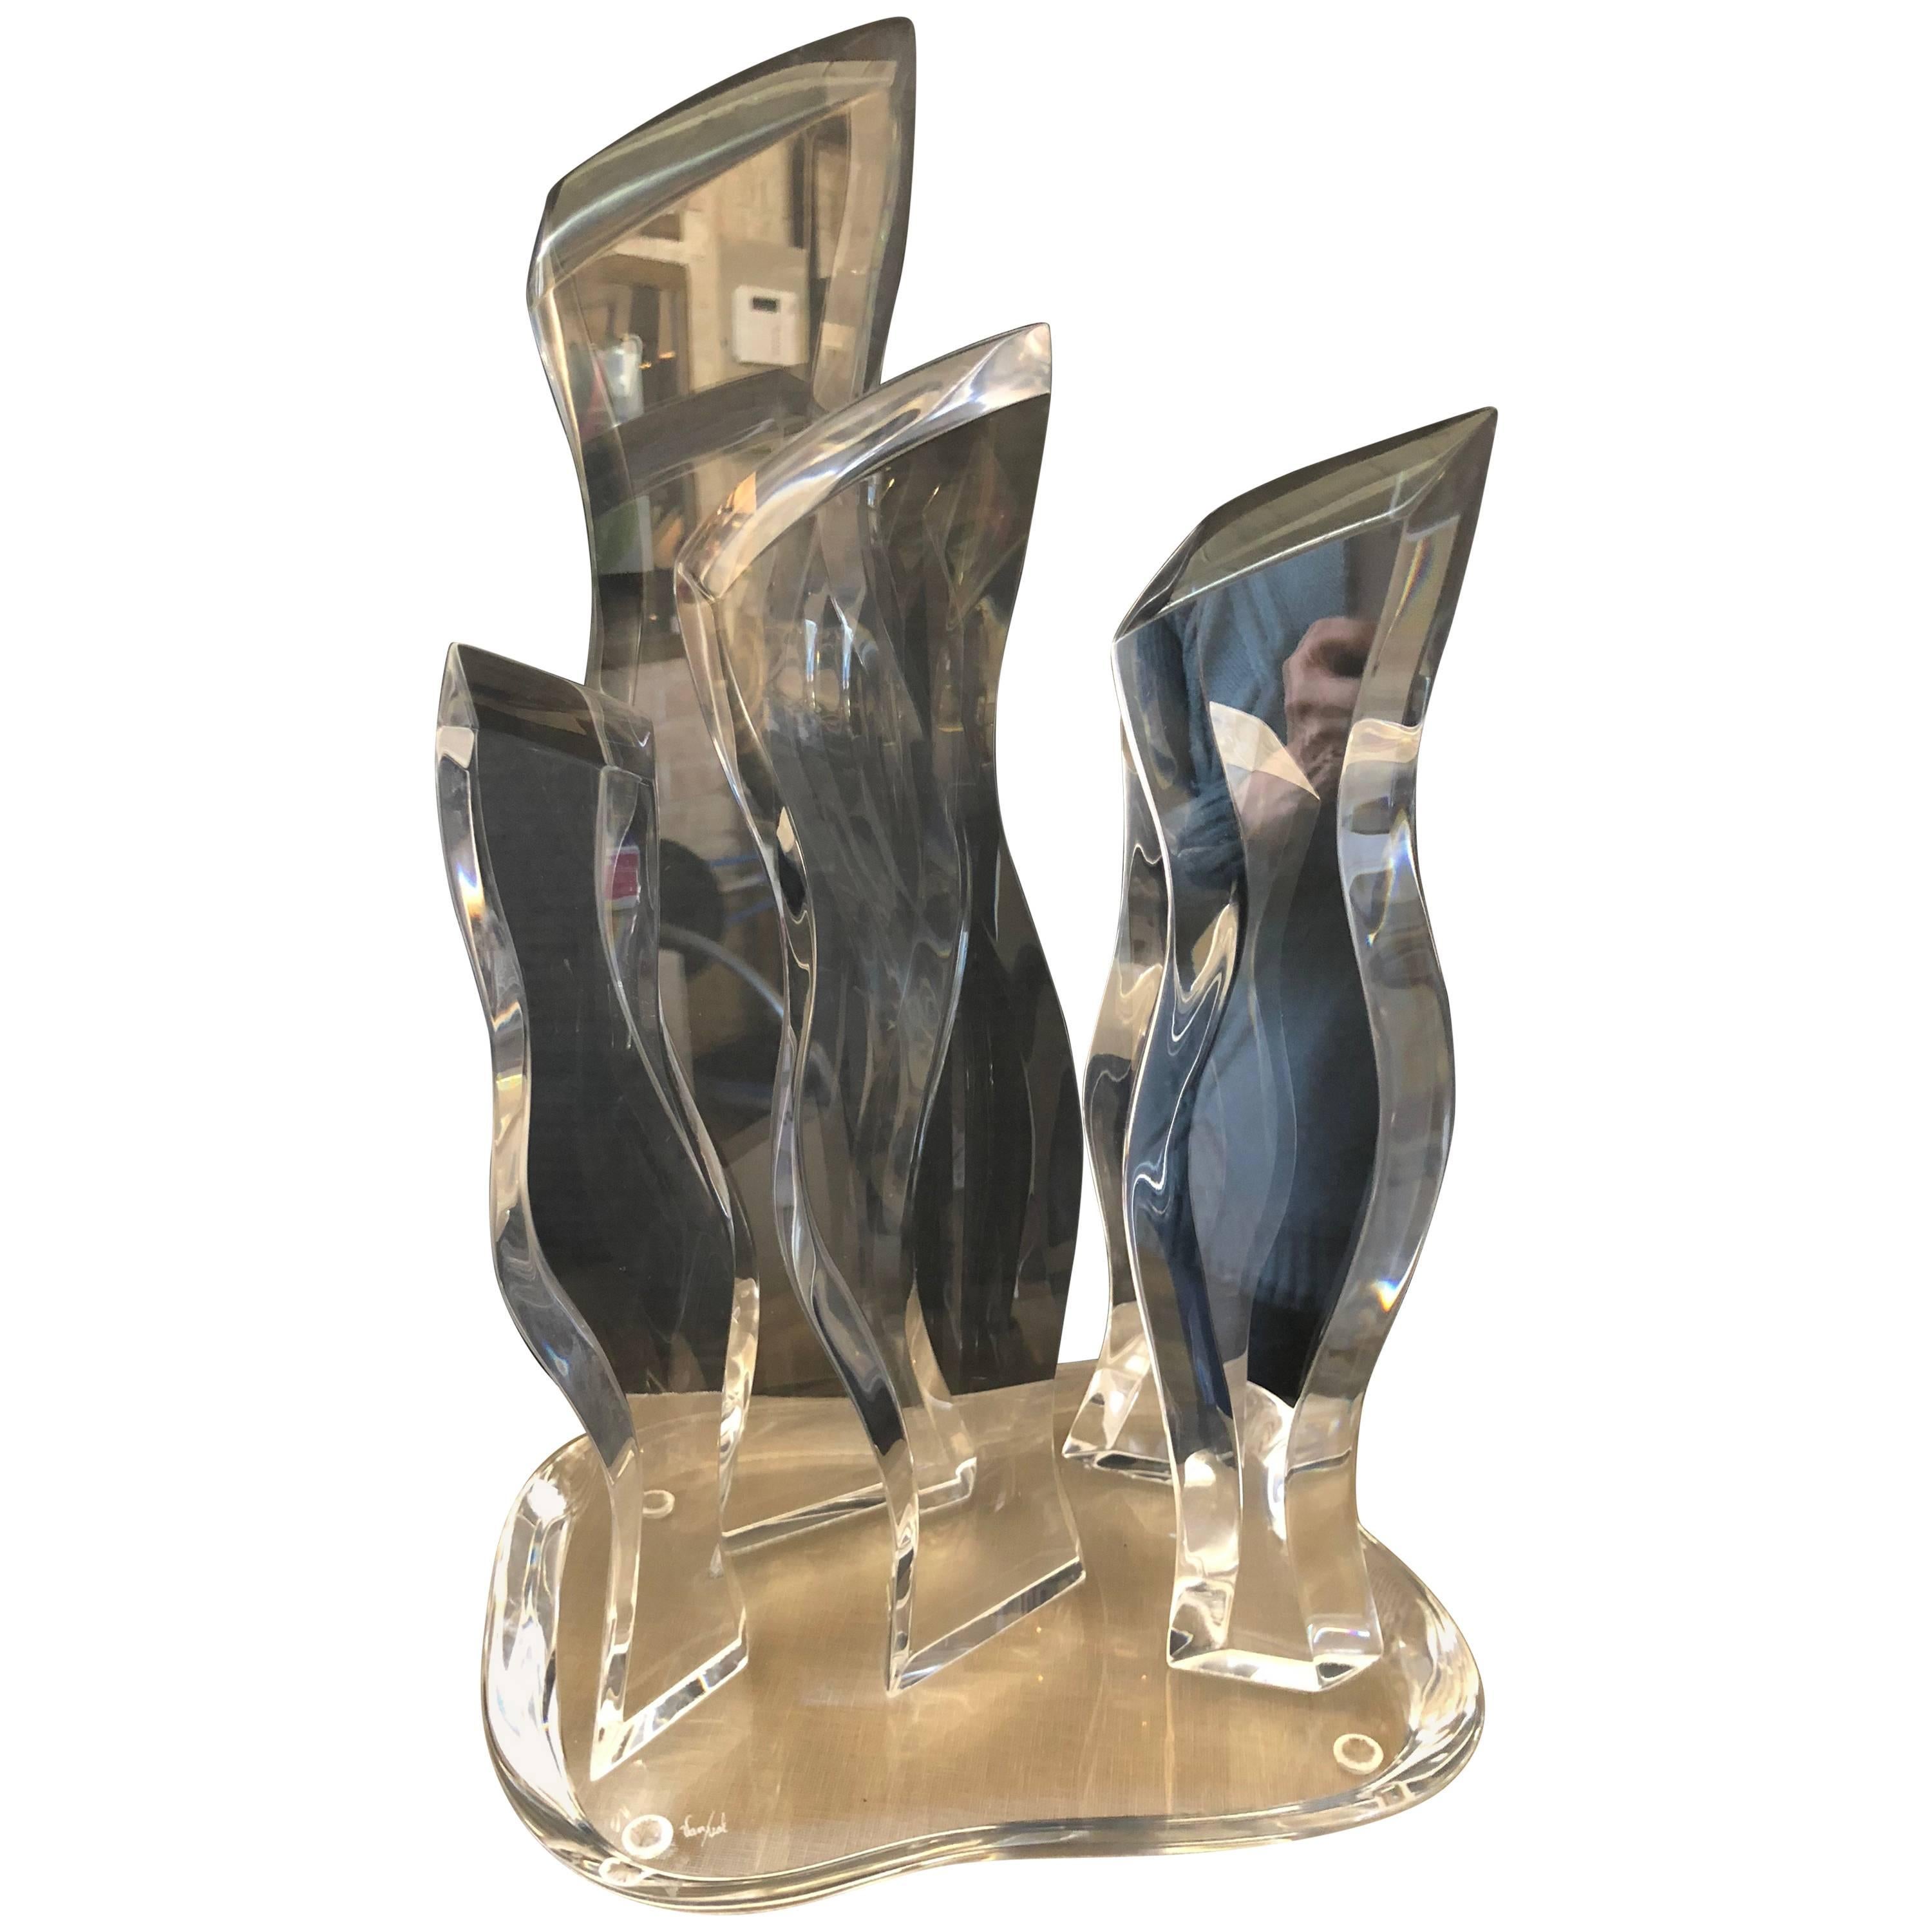 A 1970s large abstract Lucite sculpture signed Van Teal on the base.